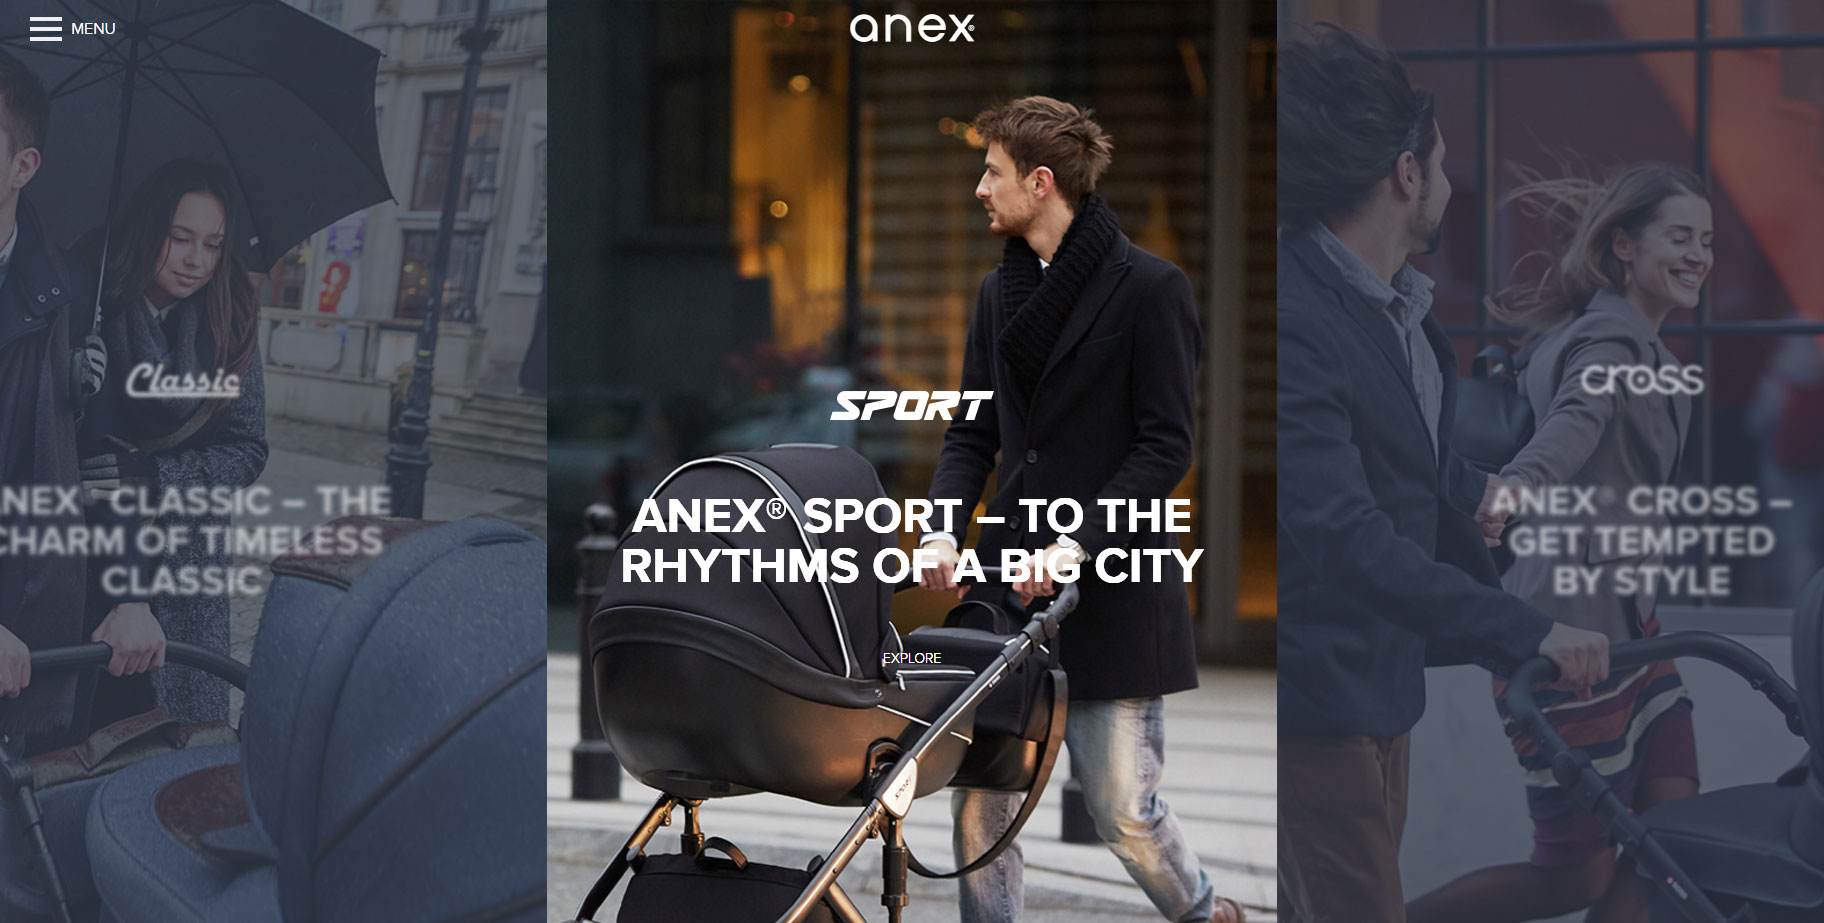 Anex - Website of the Day